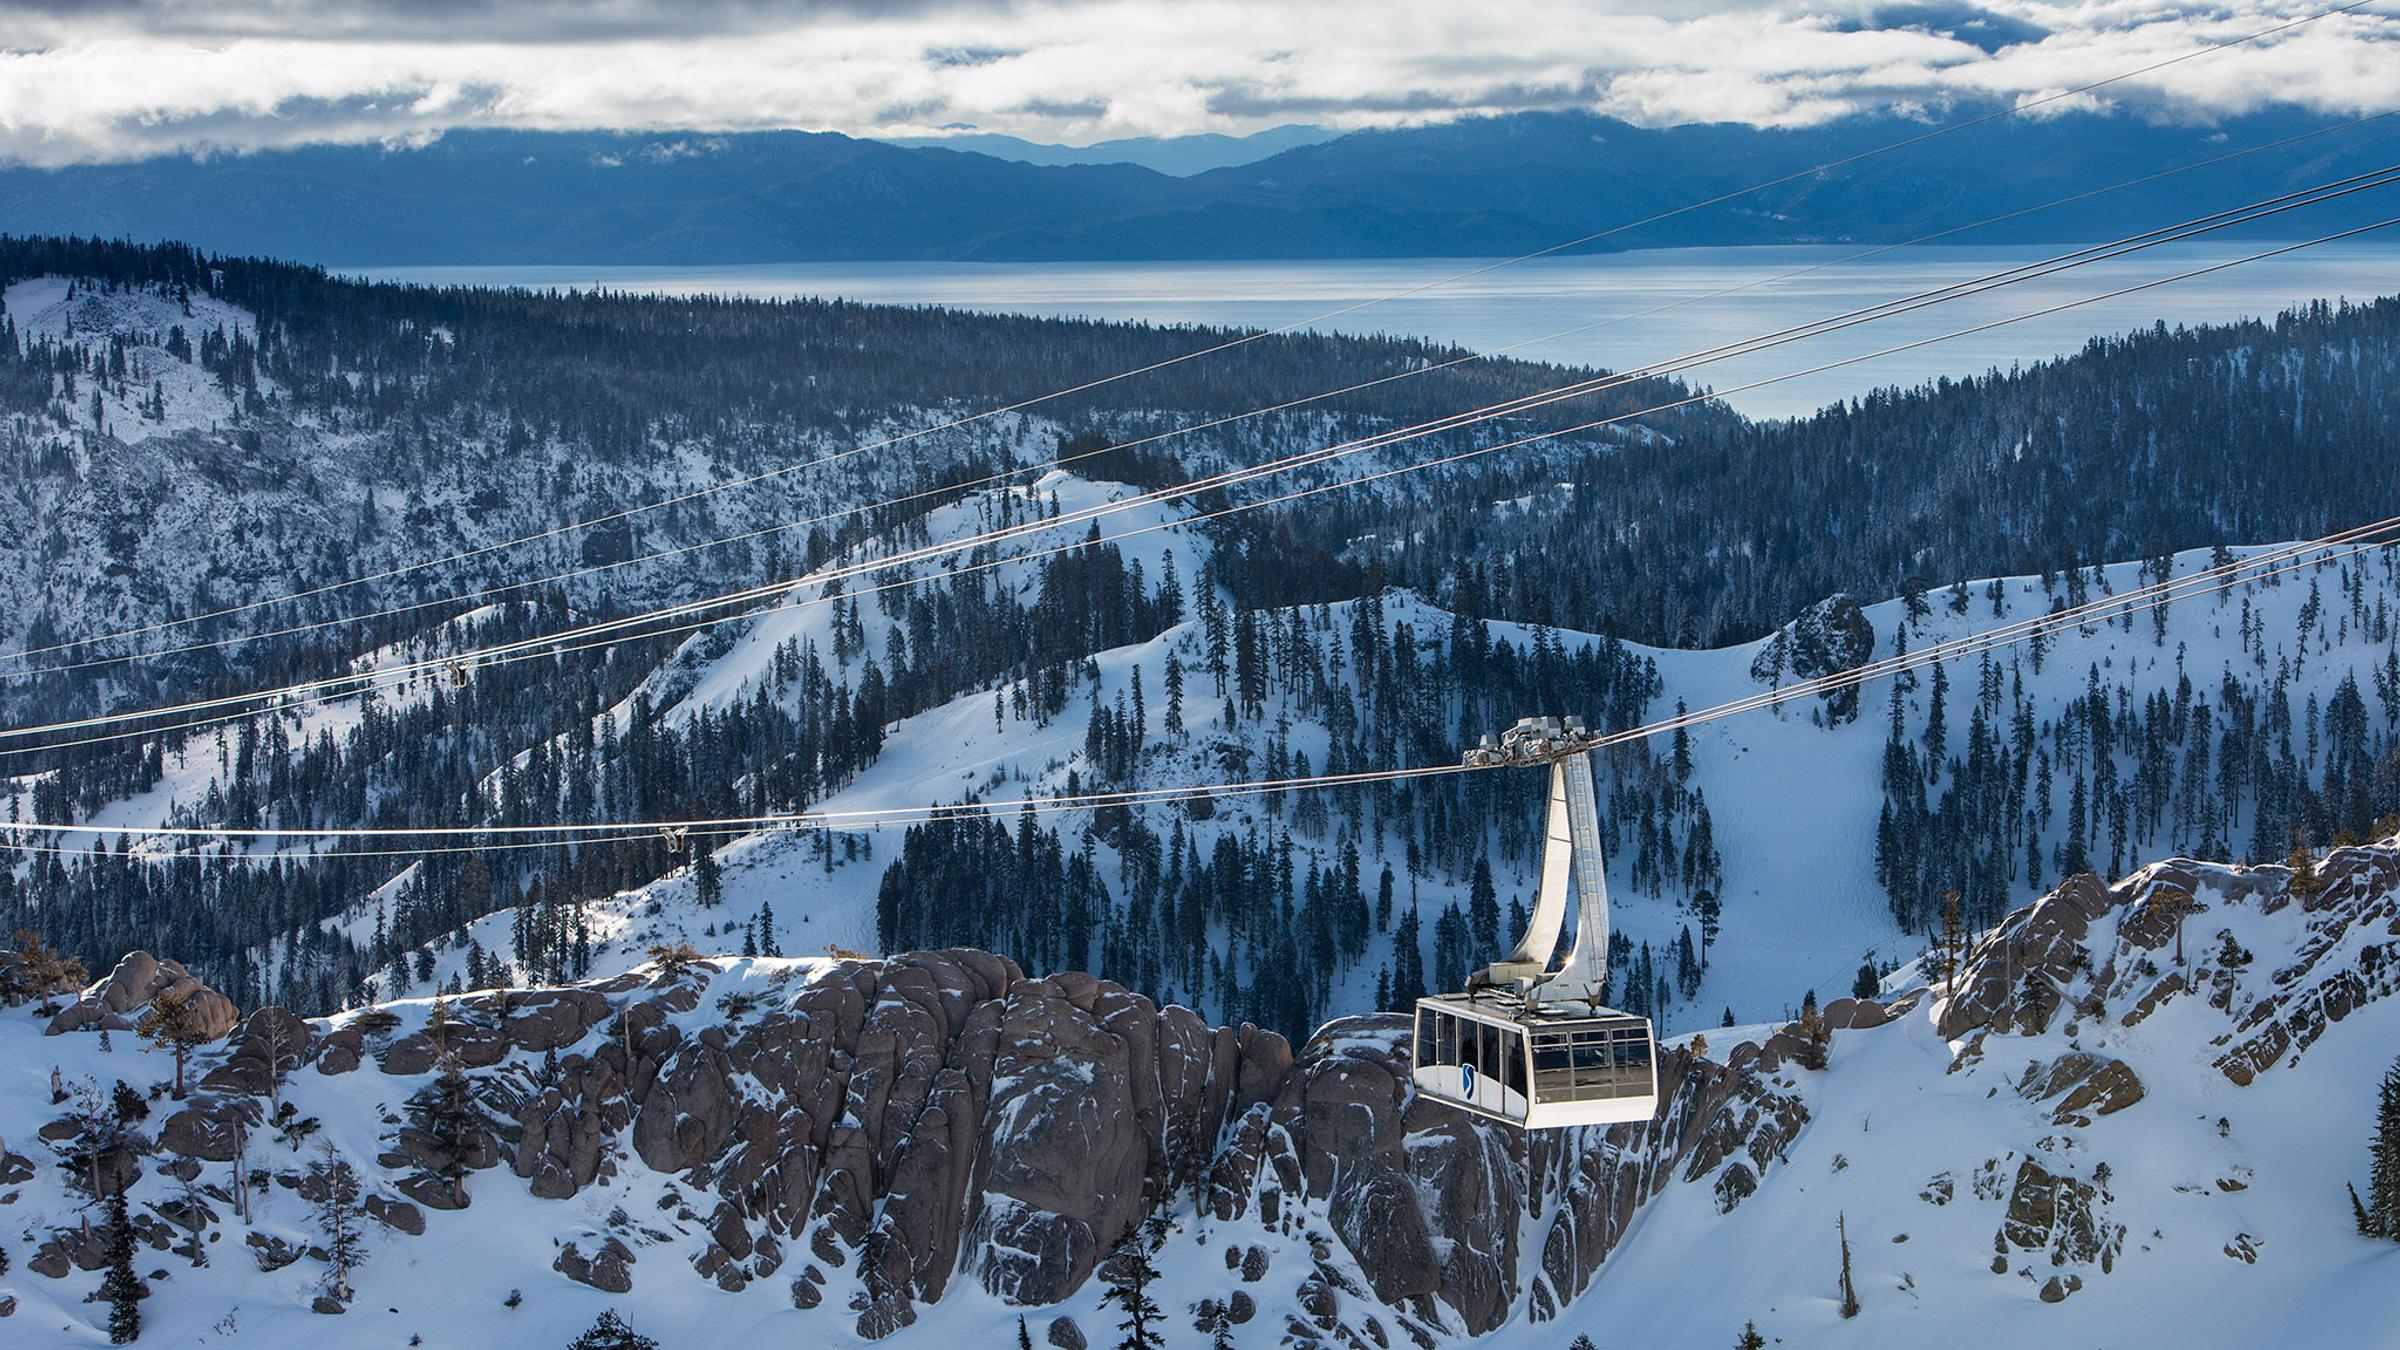 Aerial tram scenics from high camp